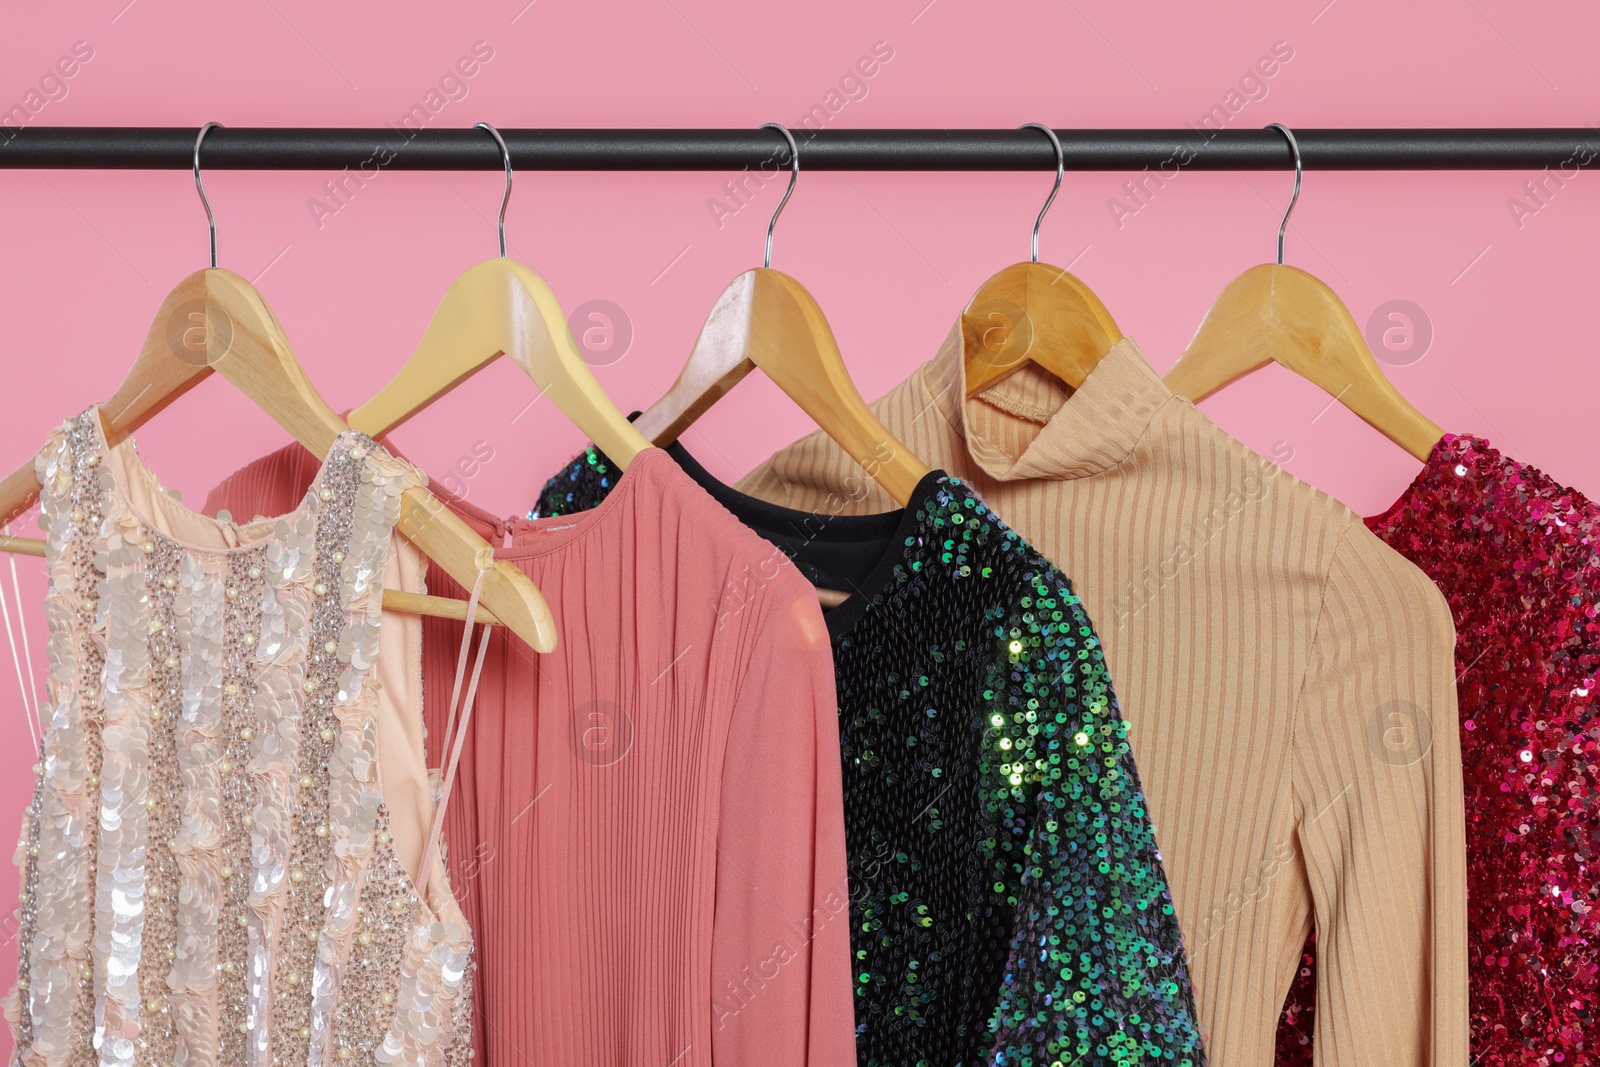 Photo of Rack with stylish women's clothes on wooden hangers against pink background, closeup